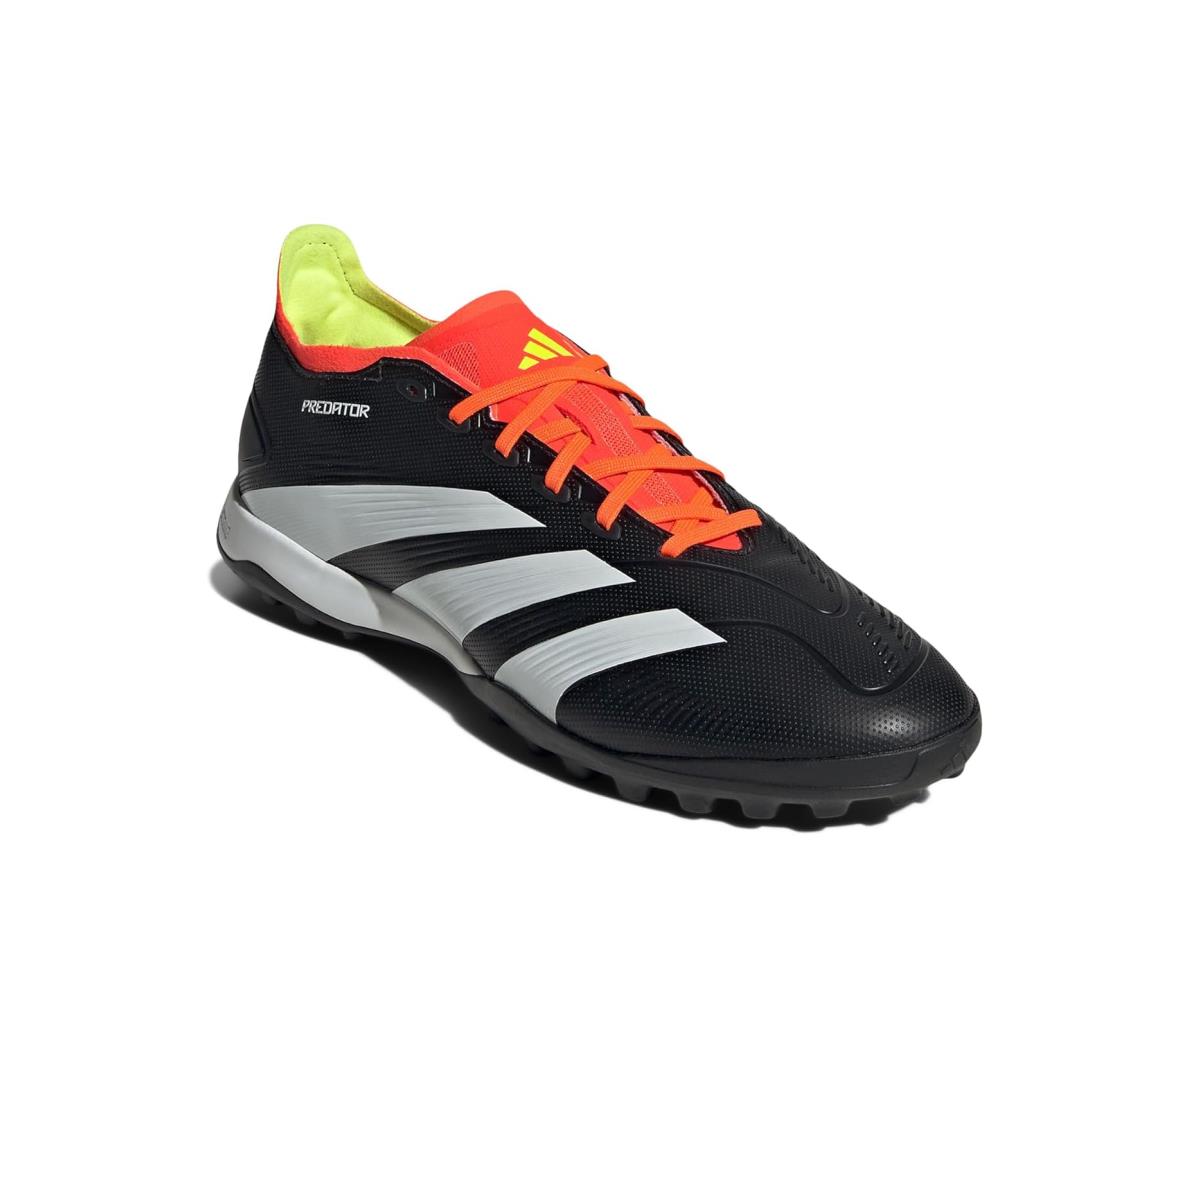 Unisex Sneakers Athletic Shoes Adidas Predator 24 League Low Turf Black/White/Solar Red